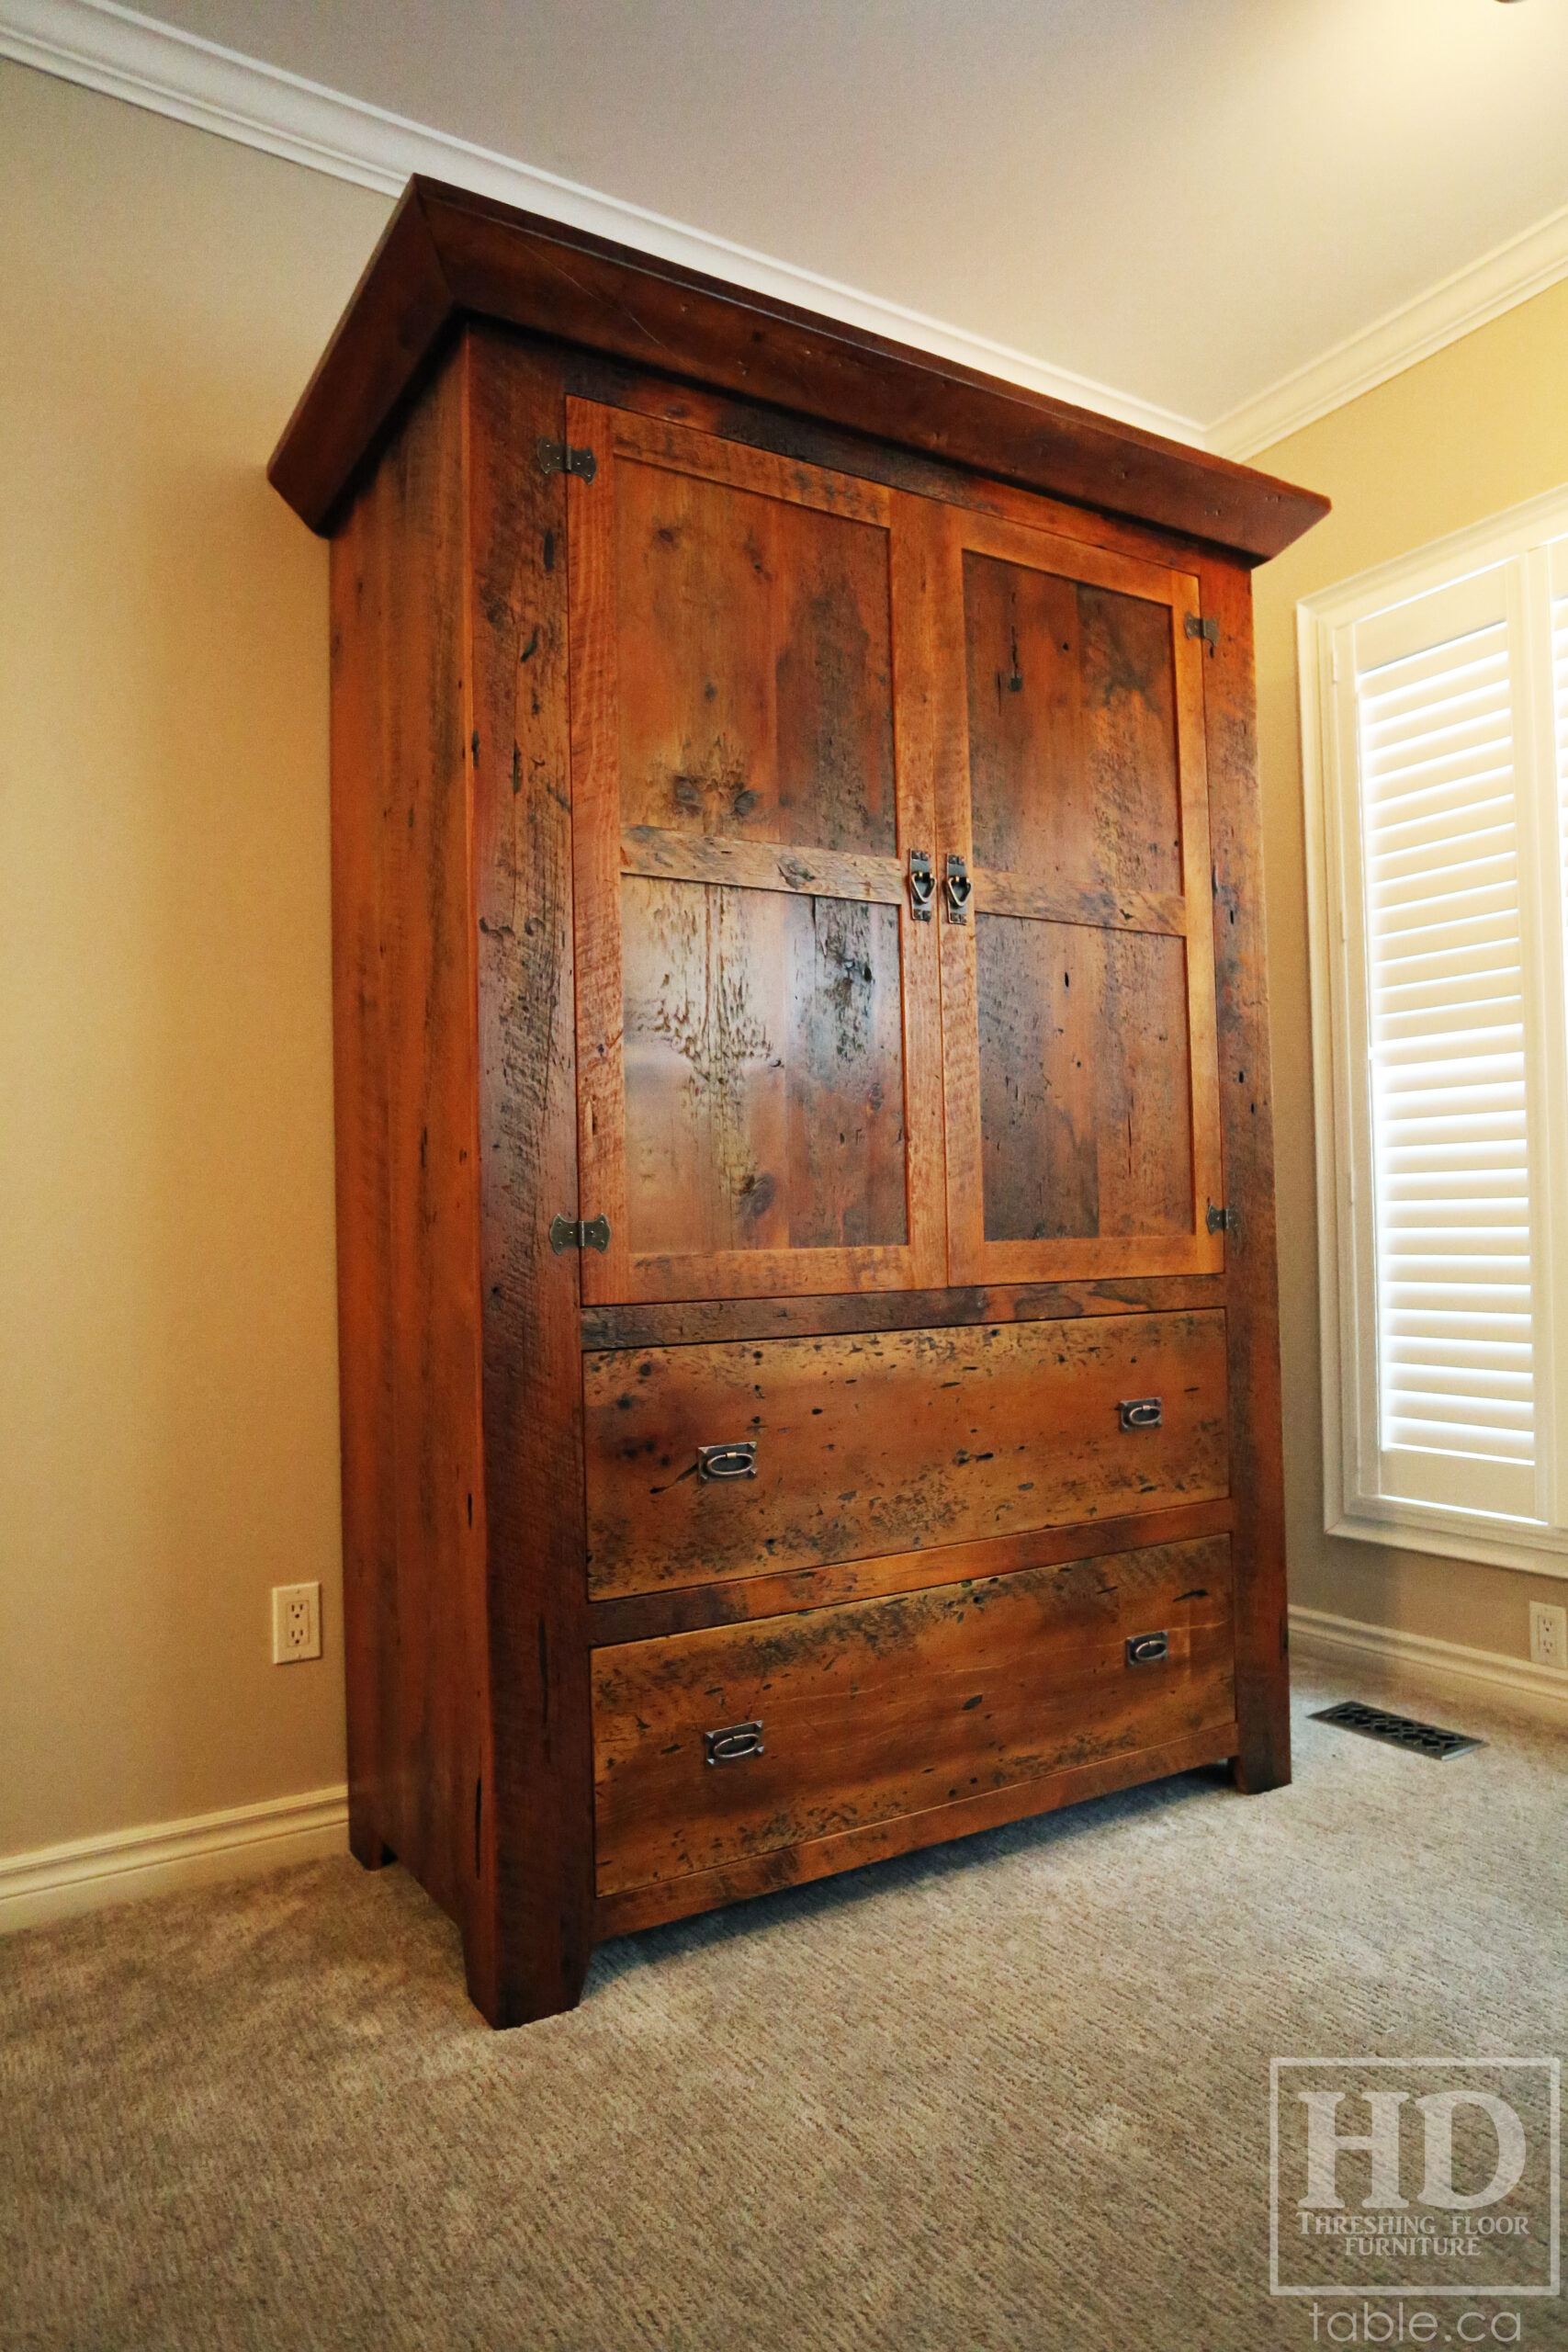 Reclaimed Ontario Barnwood Armoire - Old Growth Hemlock Threshing Floor & Grainery Board Construction - 2 Doors / 2 Drawers - Internal Hanging Option on top portion -  Original edges & distressing maintained - Cast Brass Lee Valley Hardware - Crown Molding - Satin polyurethane finish - www.table.ca